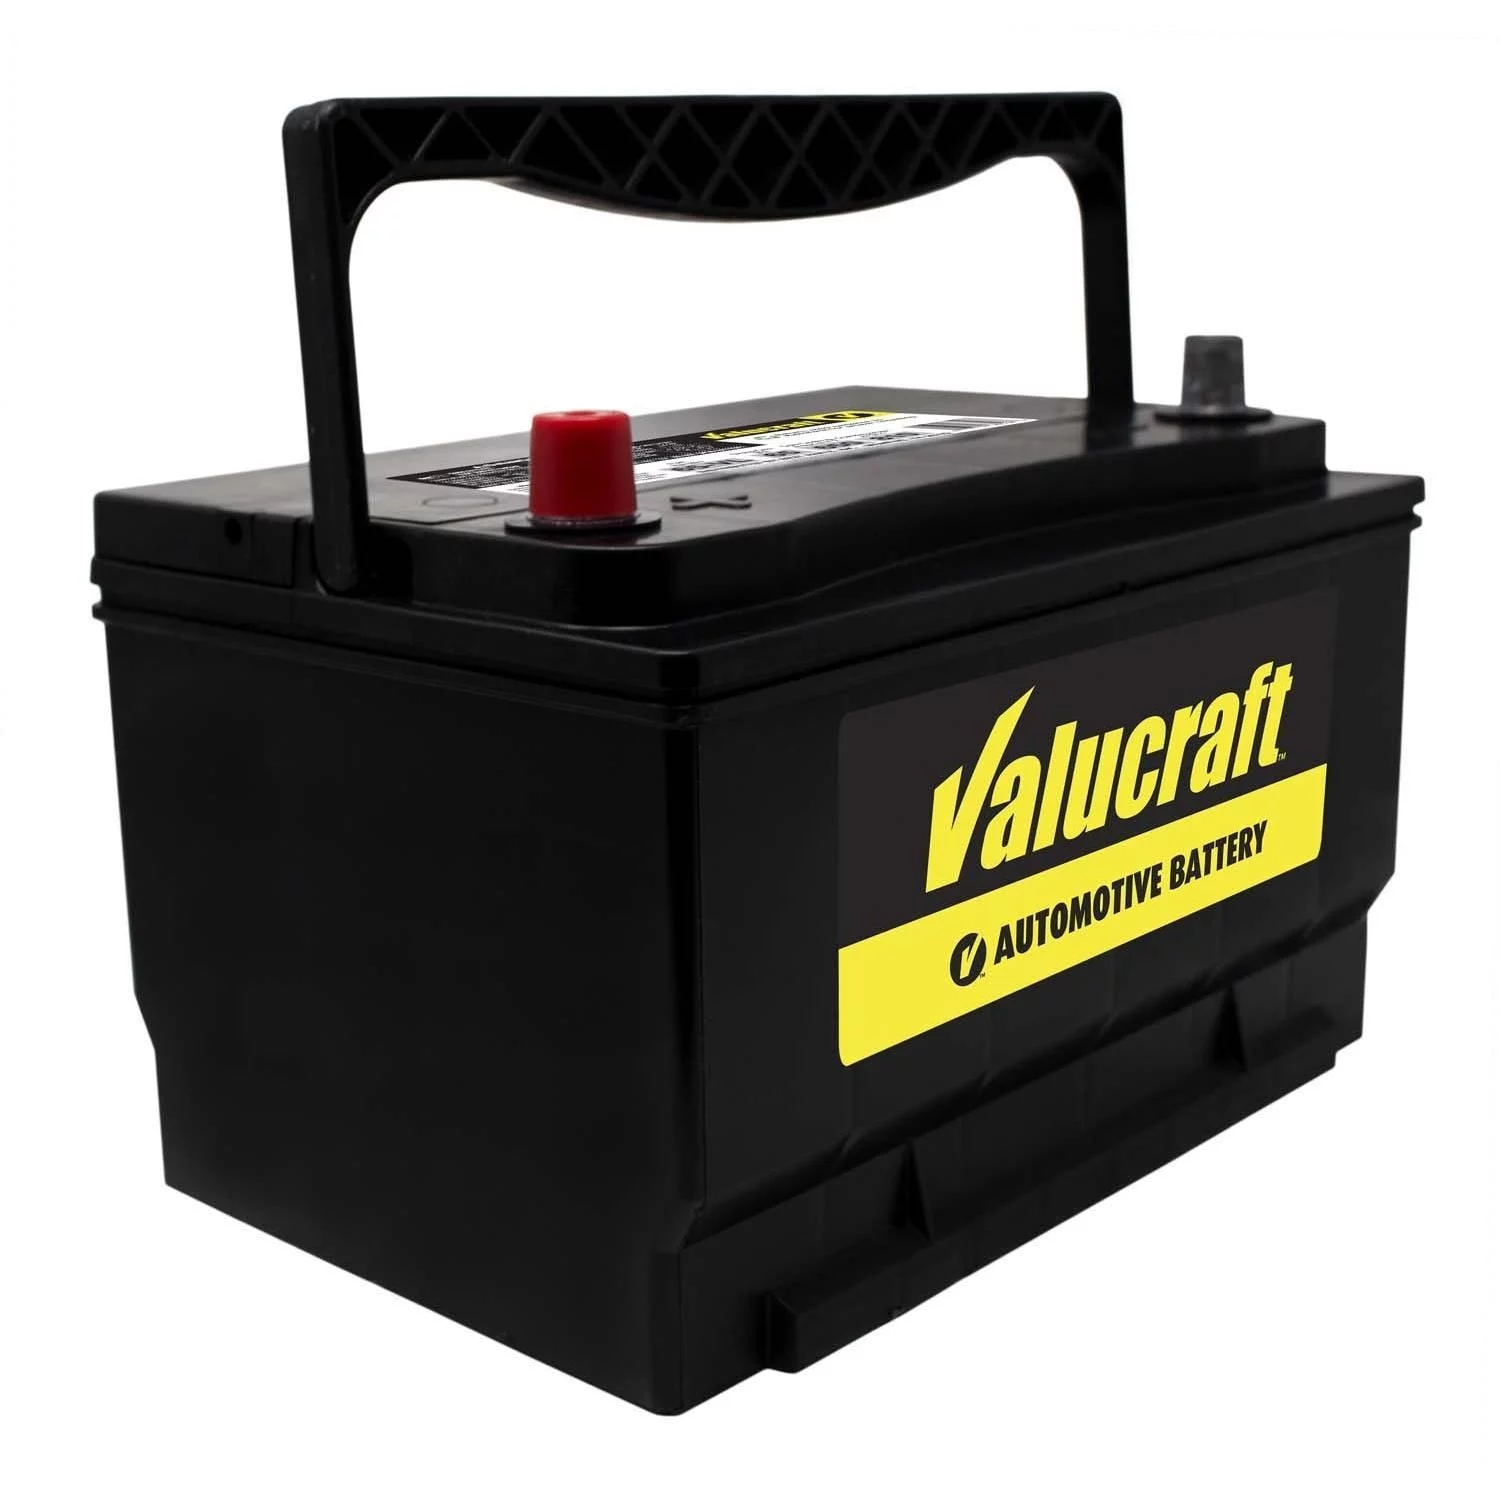 Duralast Gold Battery 75-DLG Group Size 75 700 CCA